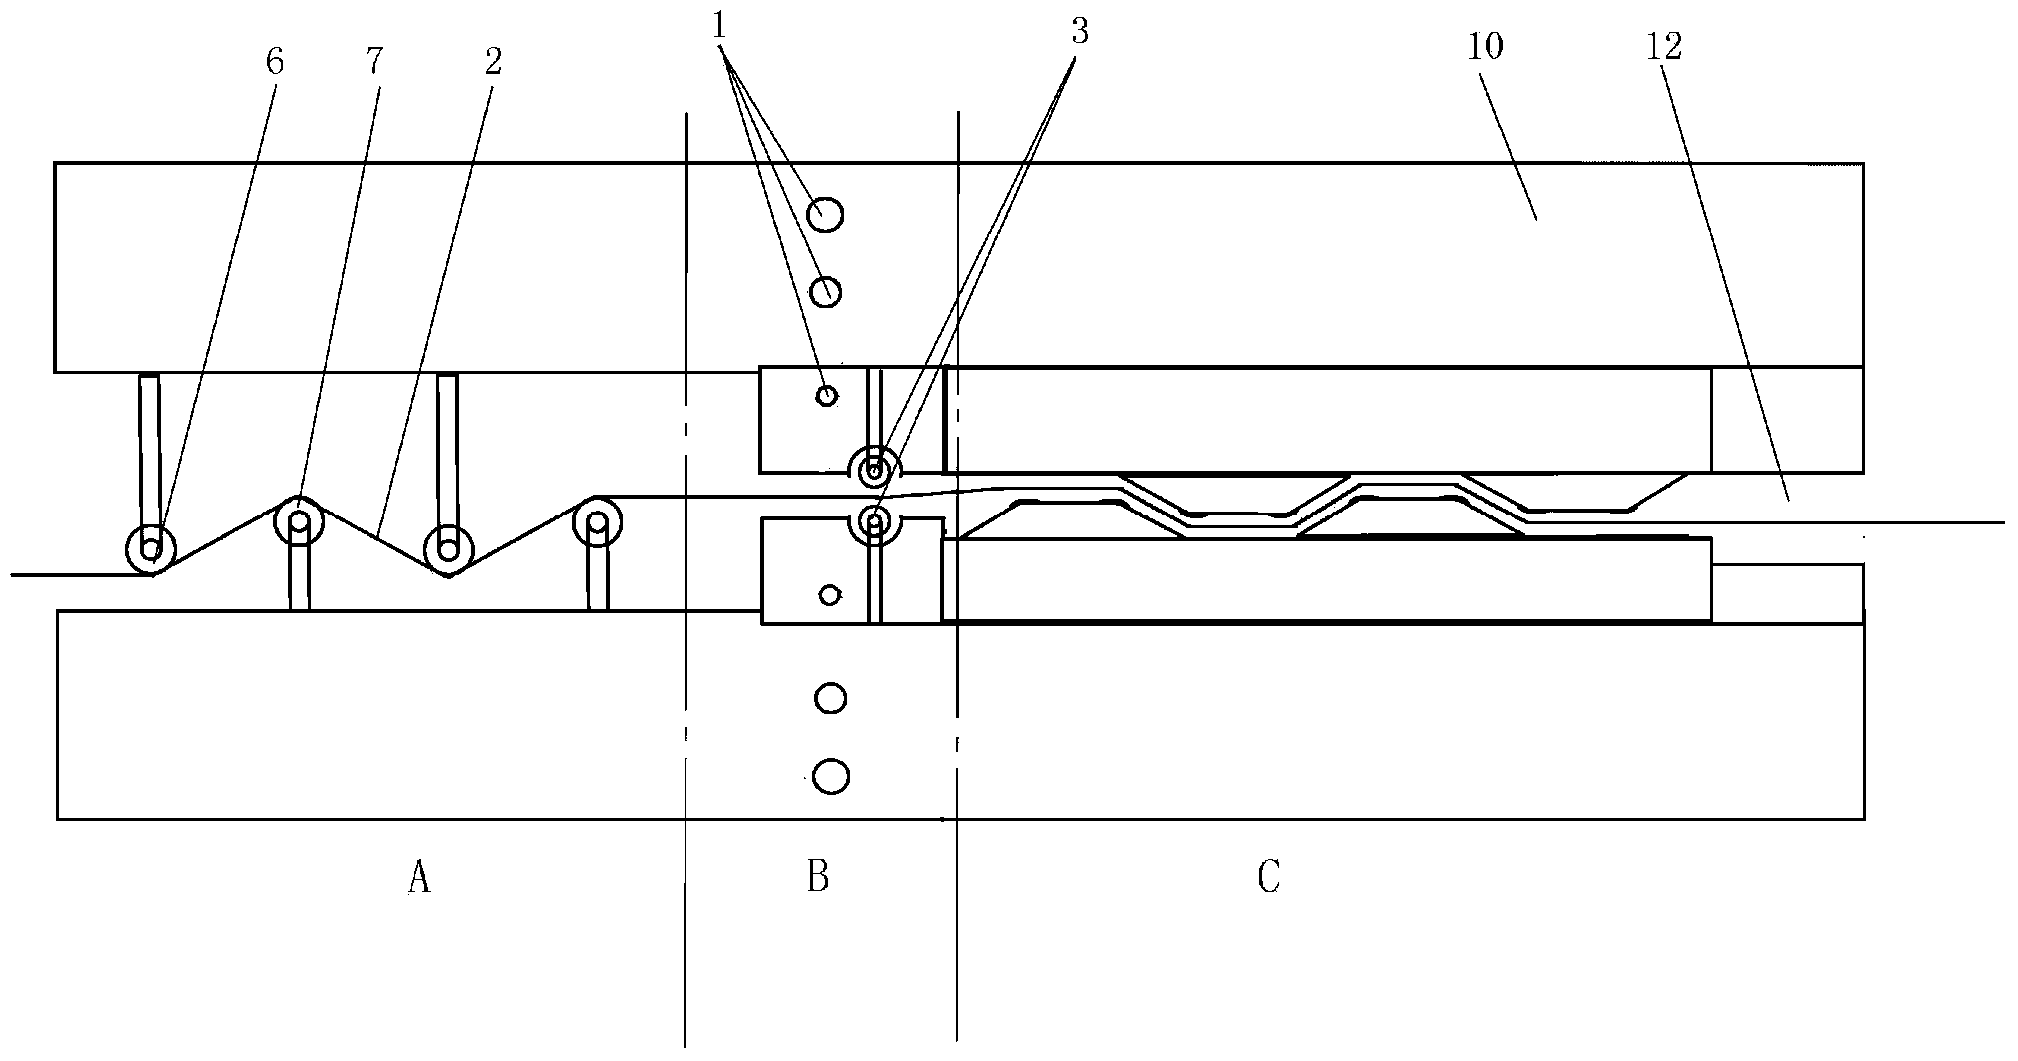 Double-sided melting and impregnating equipment and method for continuous fiber-reinforcing adhesive tape